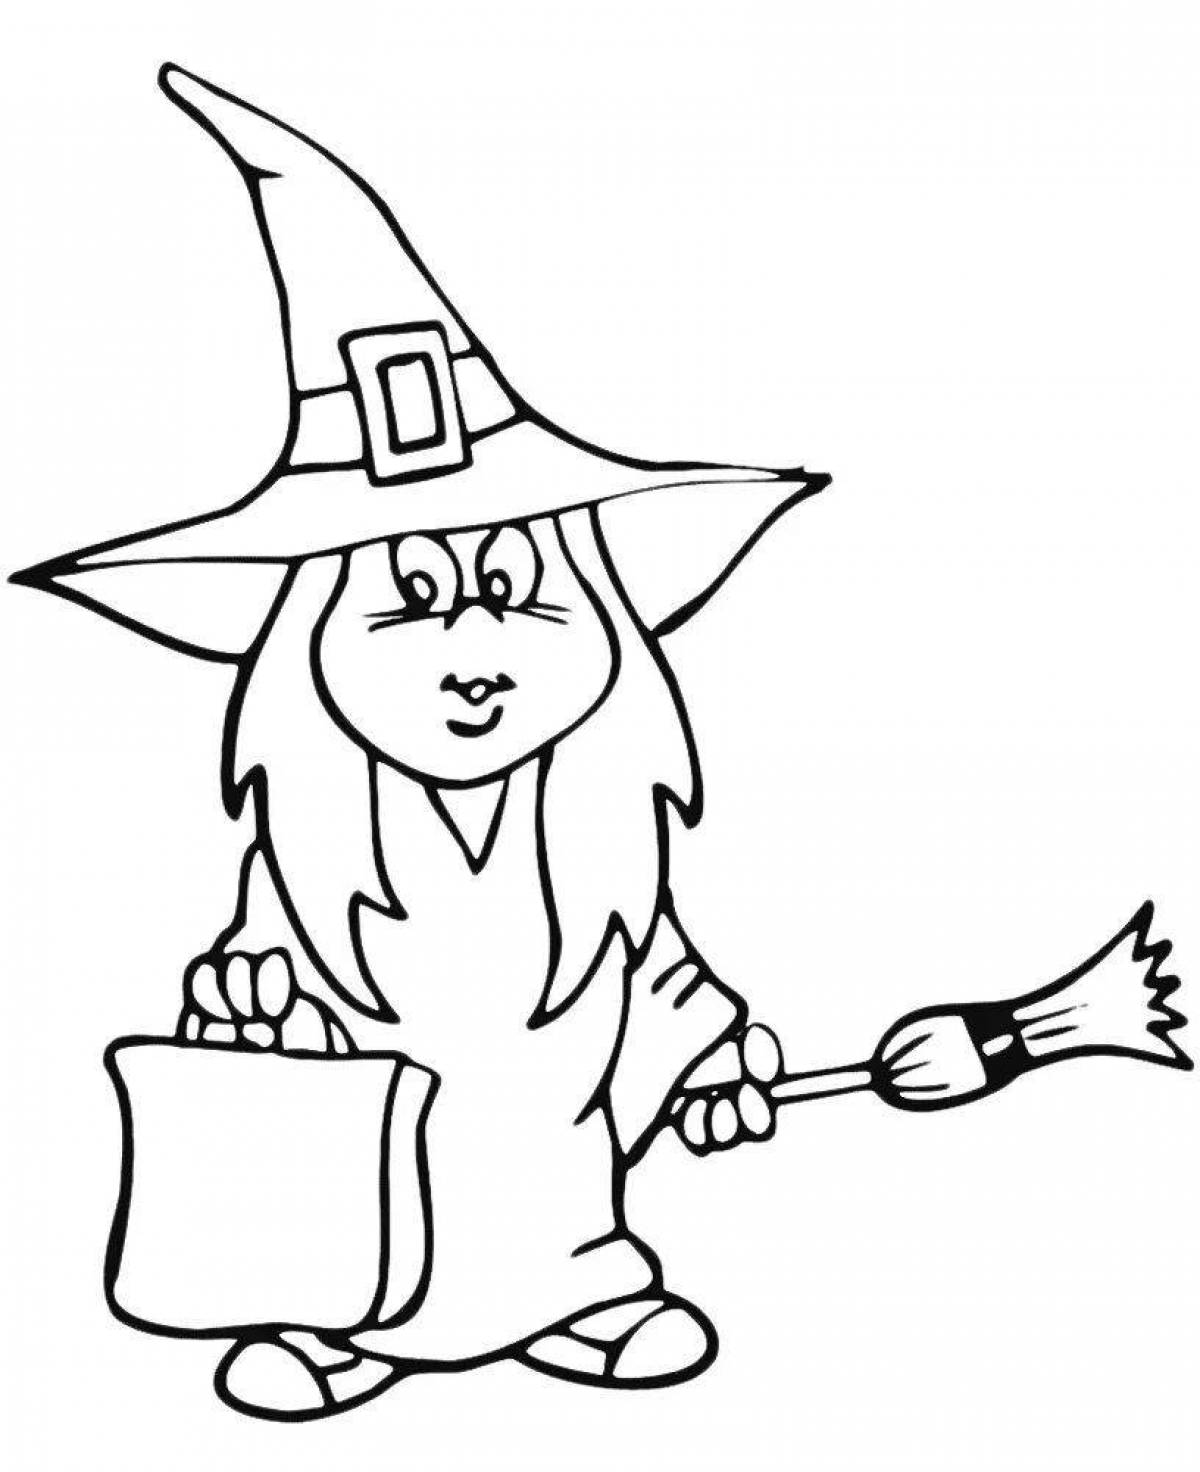 Intriguing witch coloring book